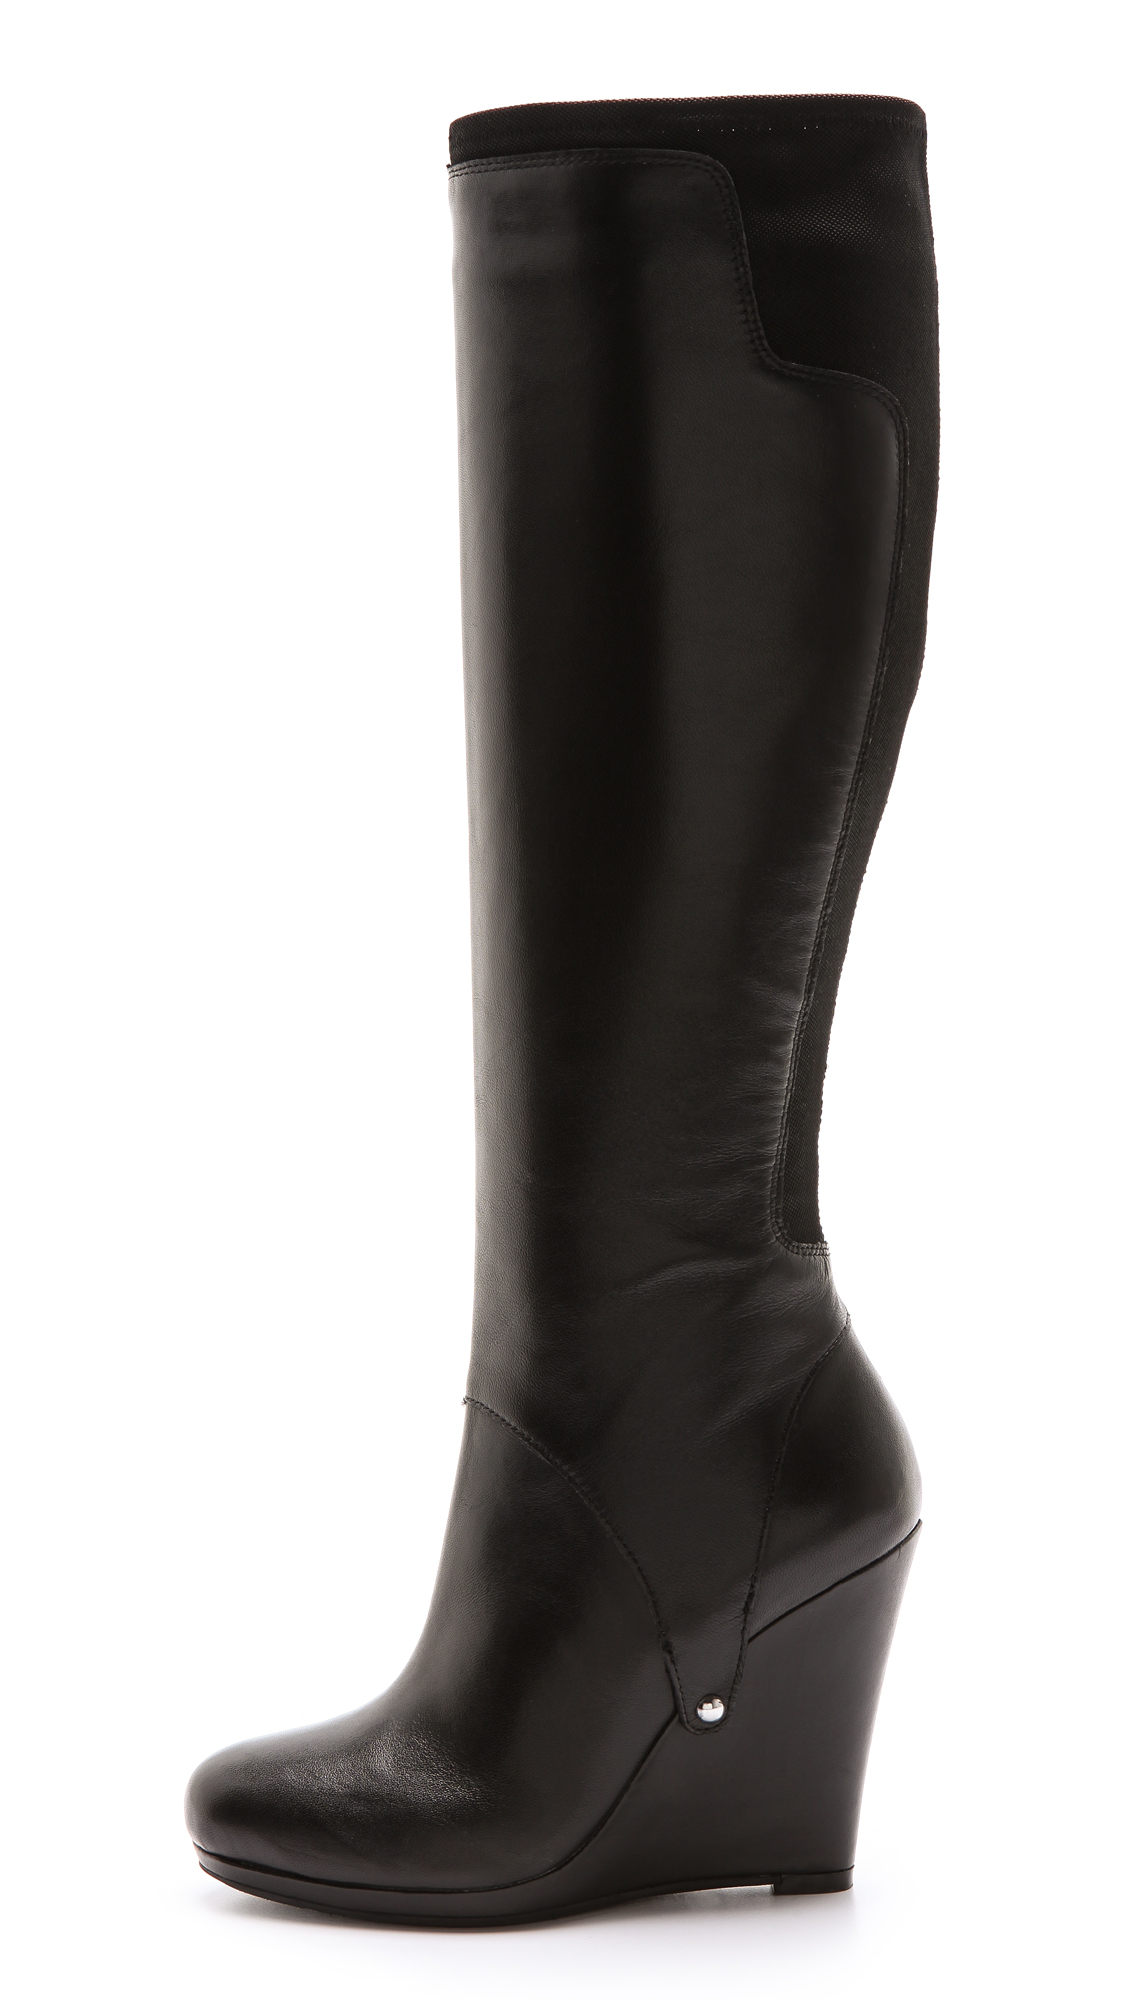 DKNY Nadia Stretch Back Wedge Boots in Black - Lyst